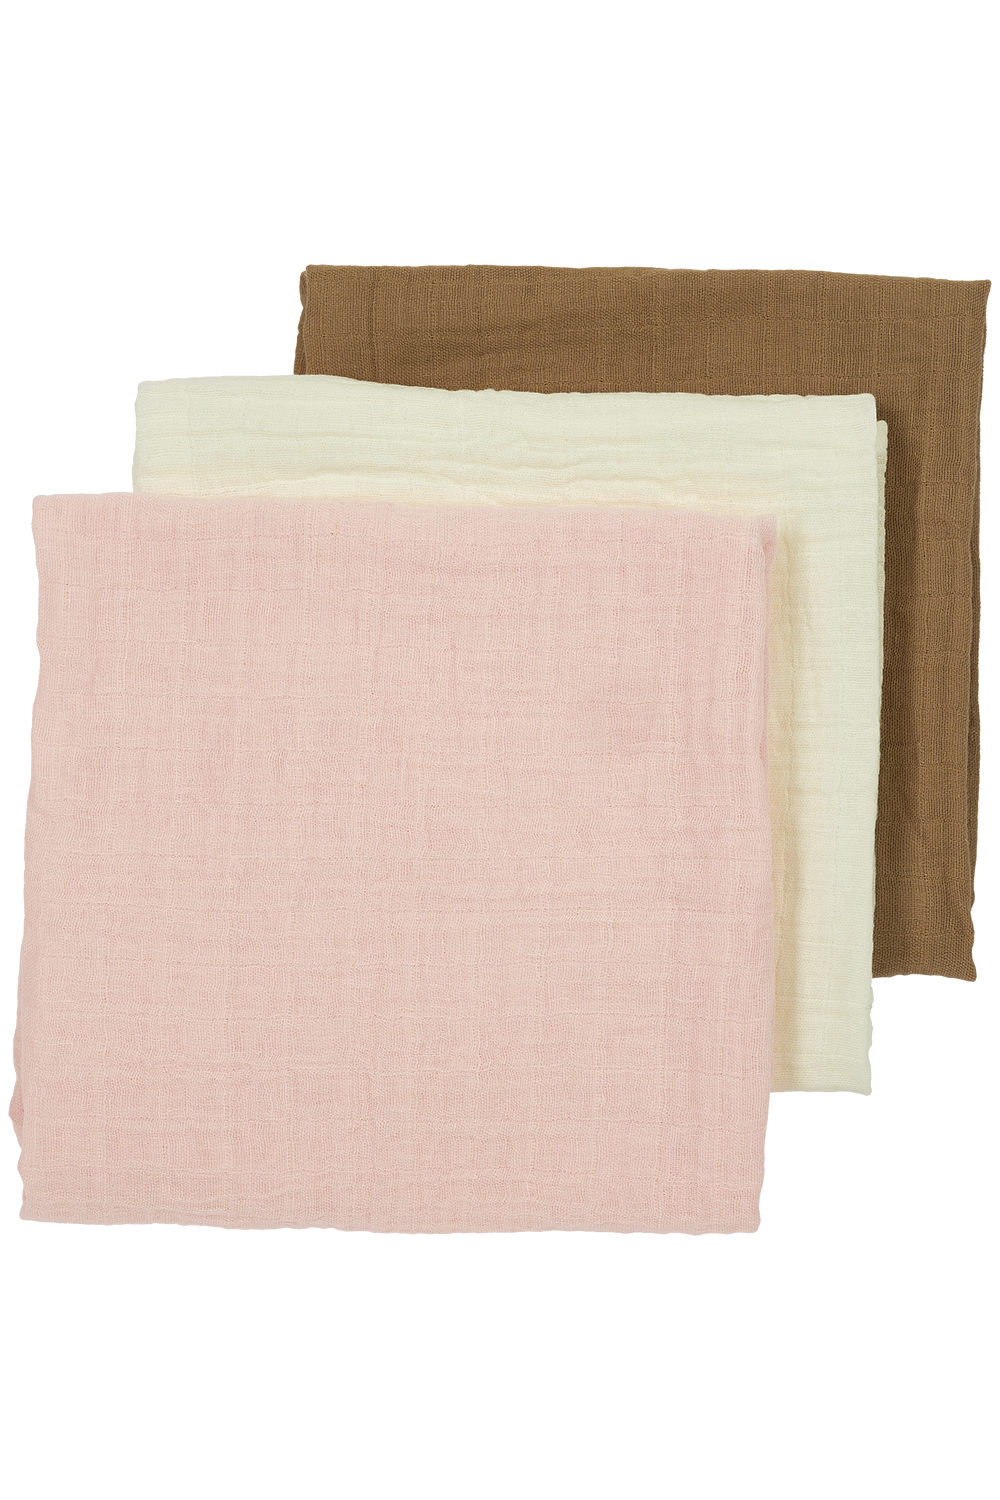 Mullwindeln 3er pack Uni - offwhite/soft pink/toffee - 70x70cm